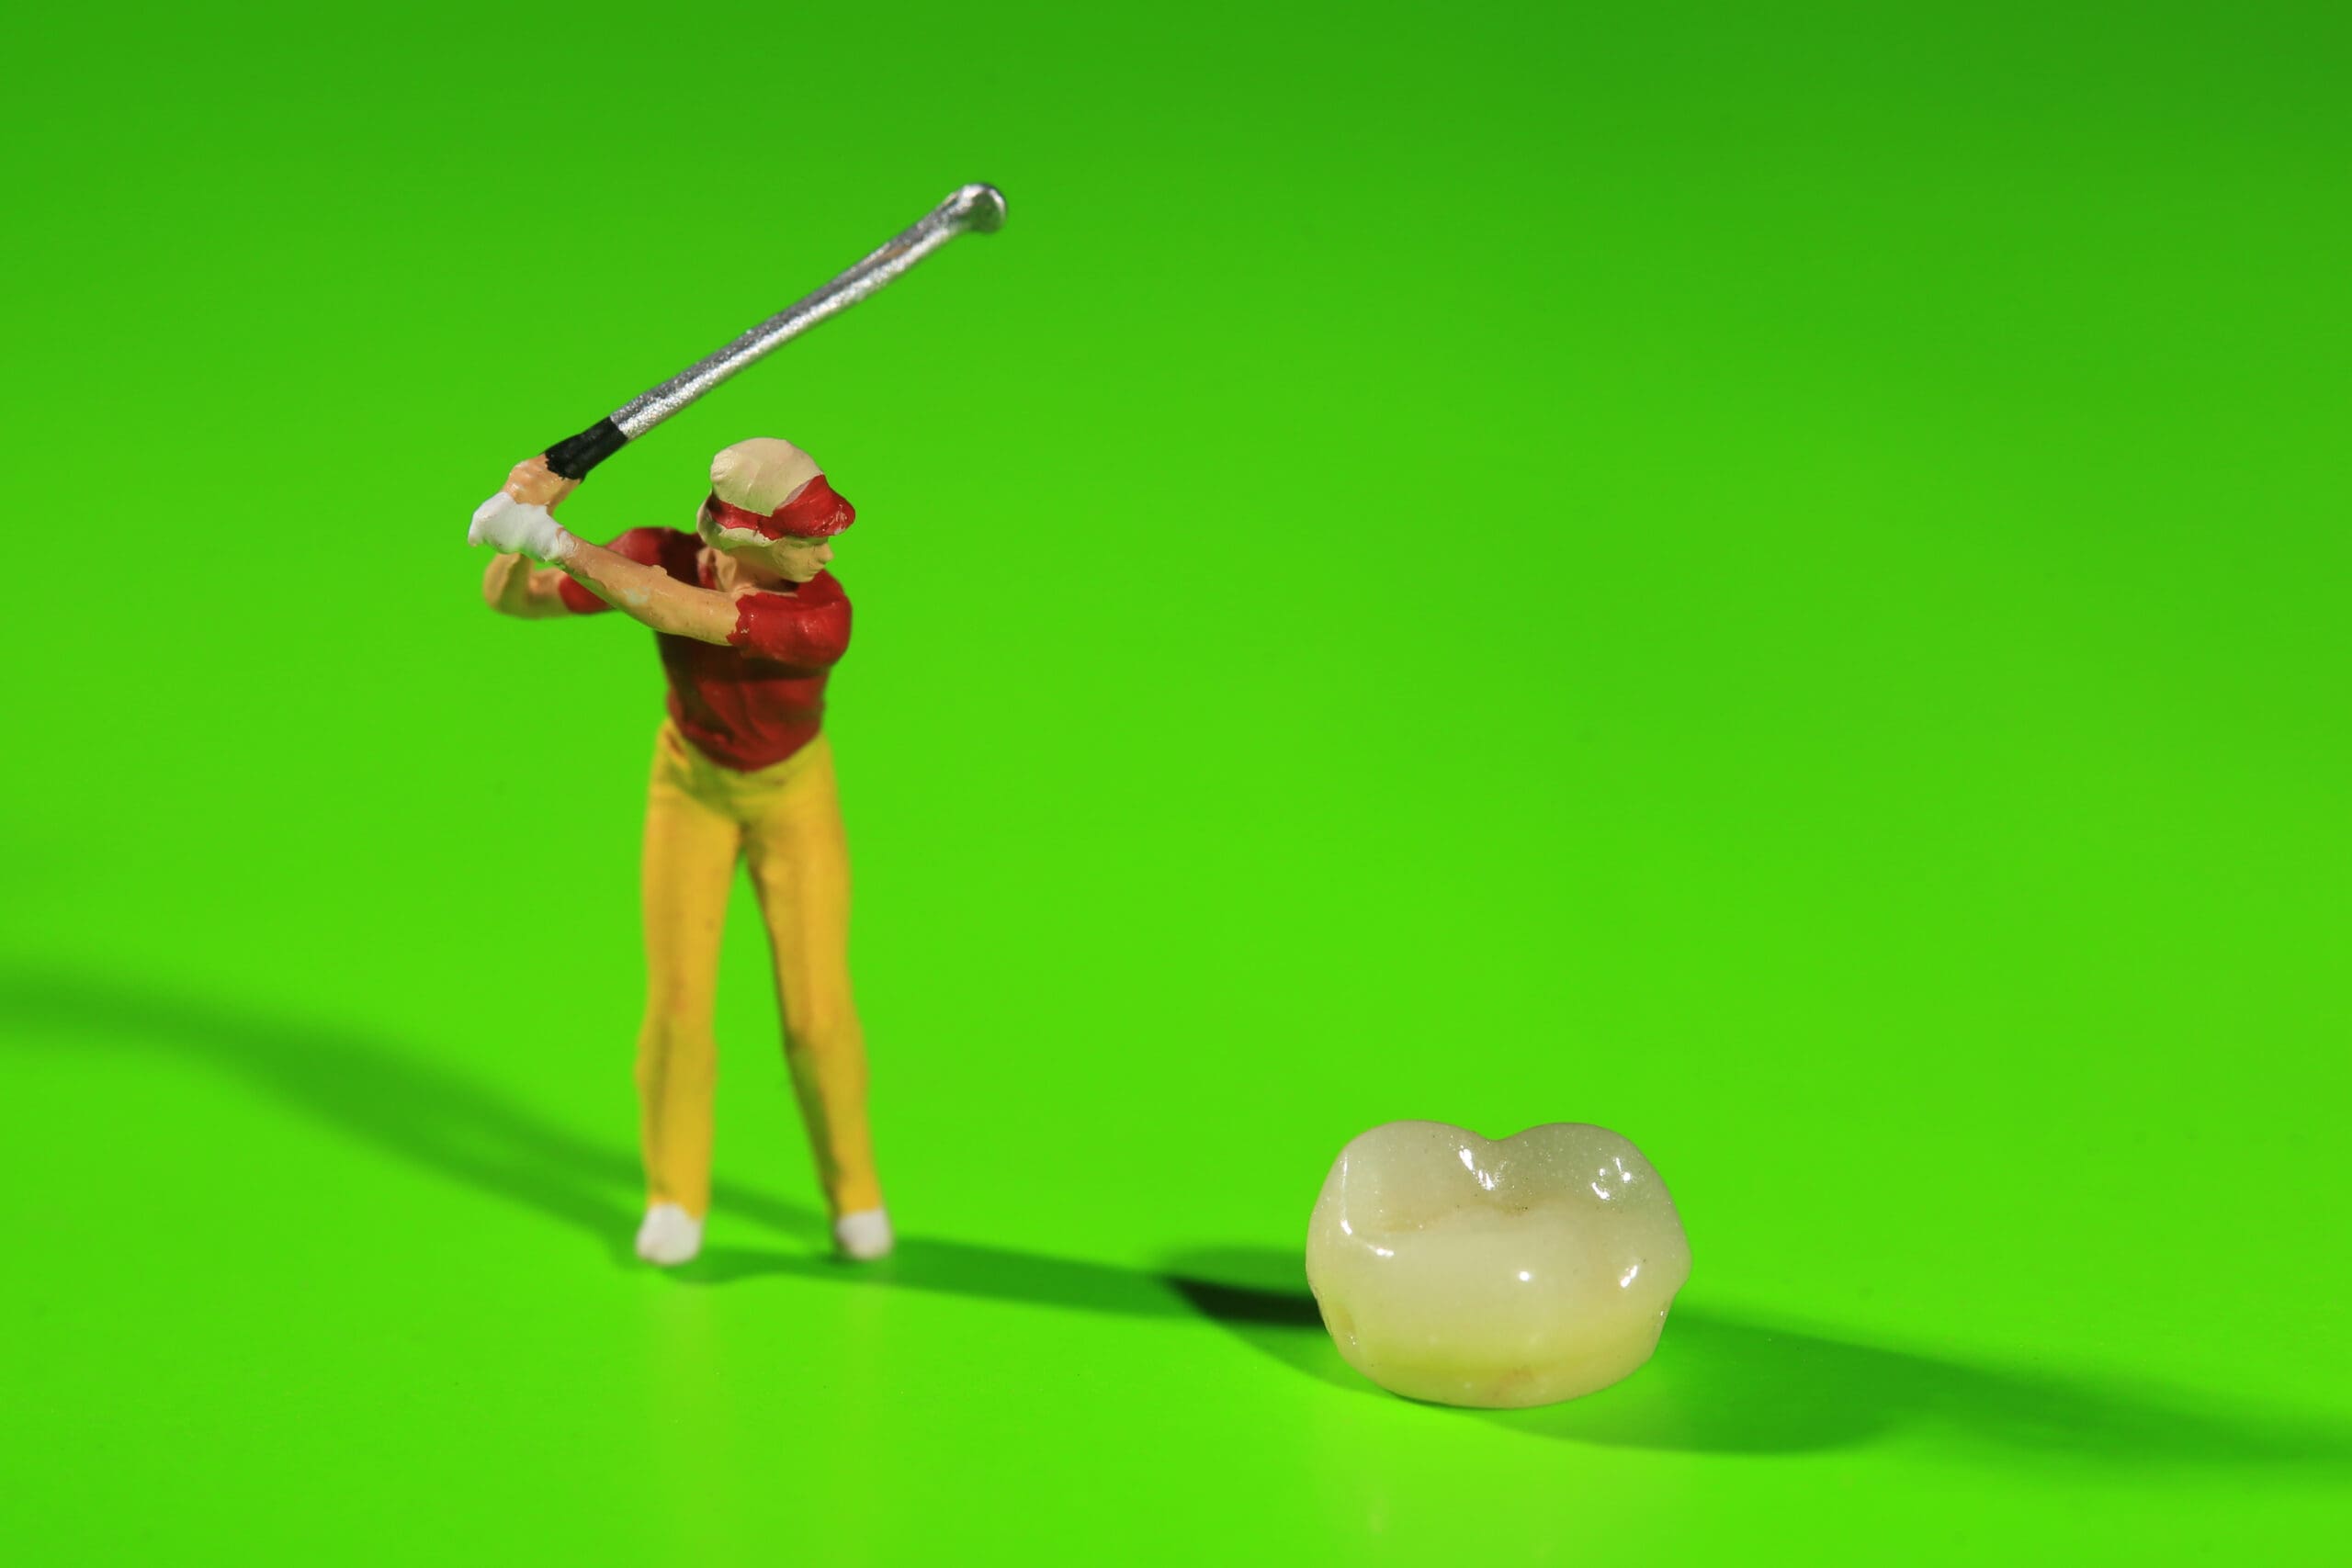 A tooth-wielding toy golfer on a green background.